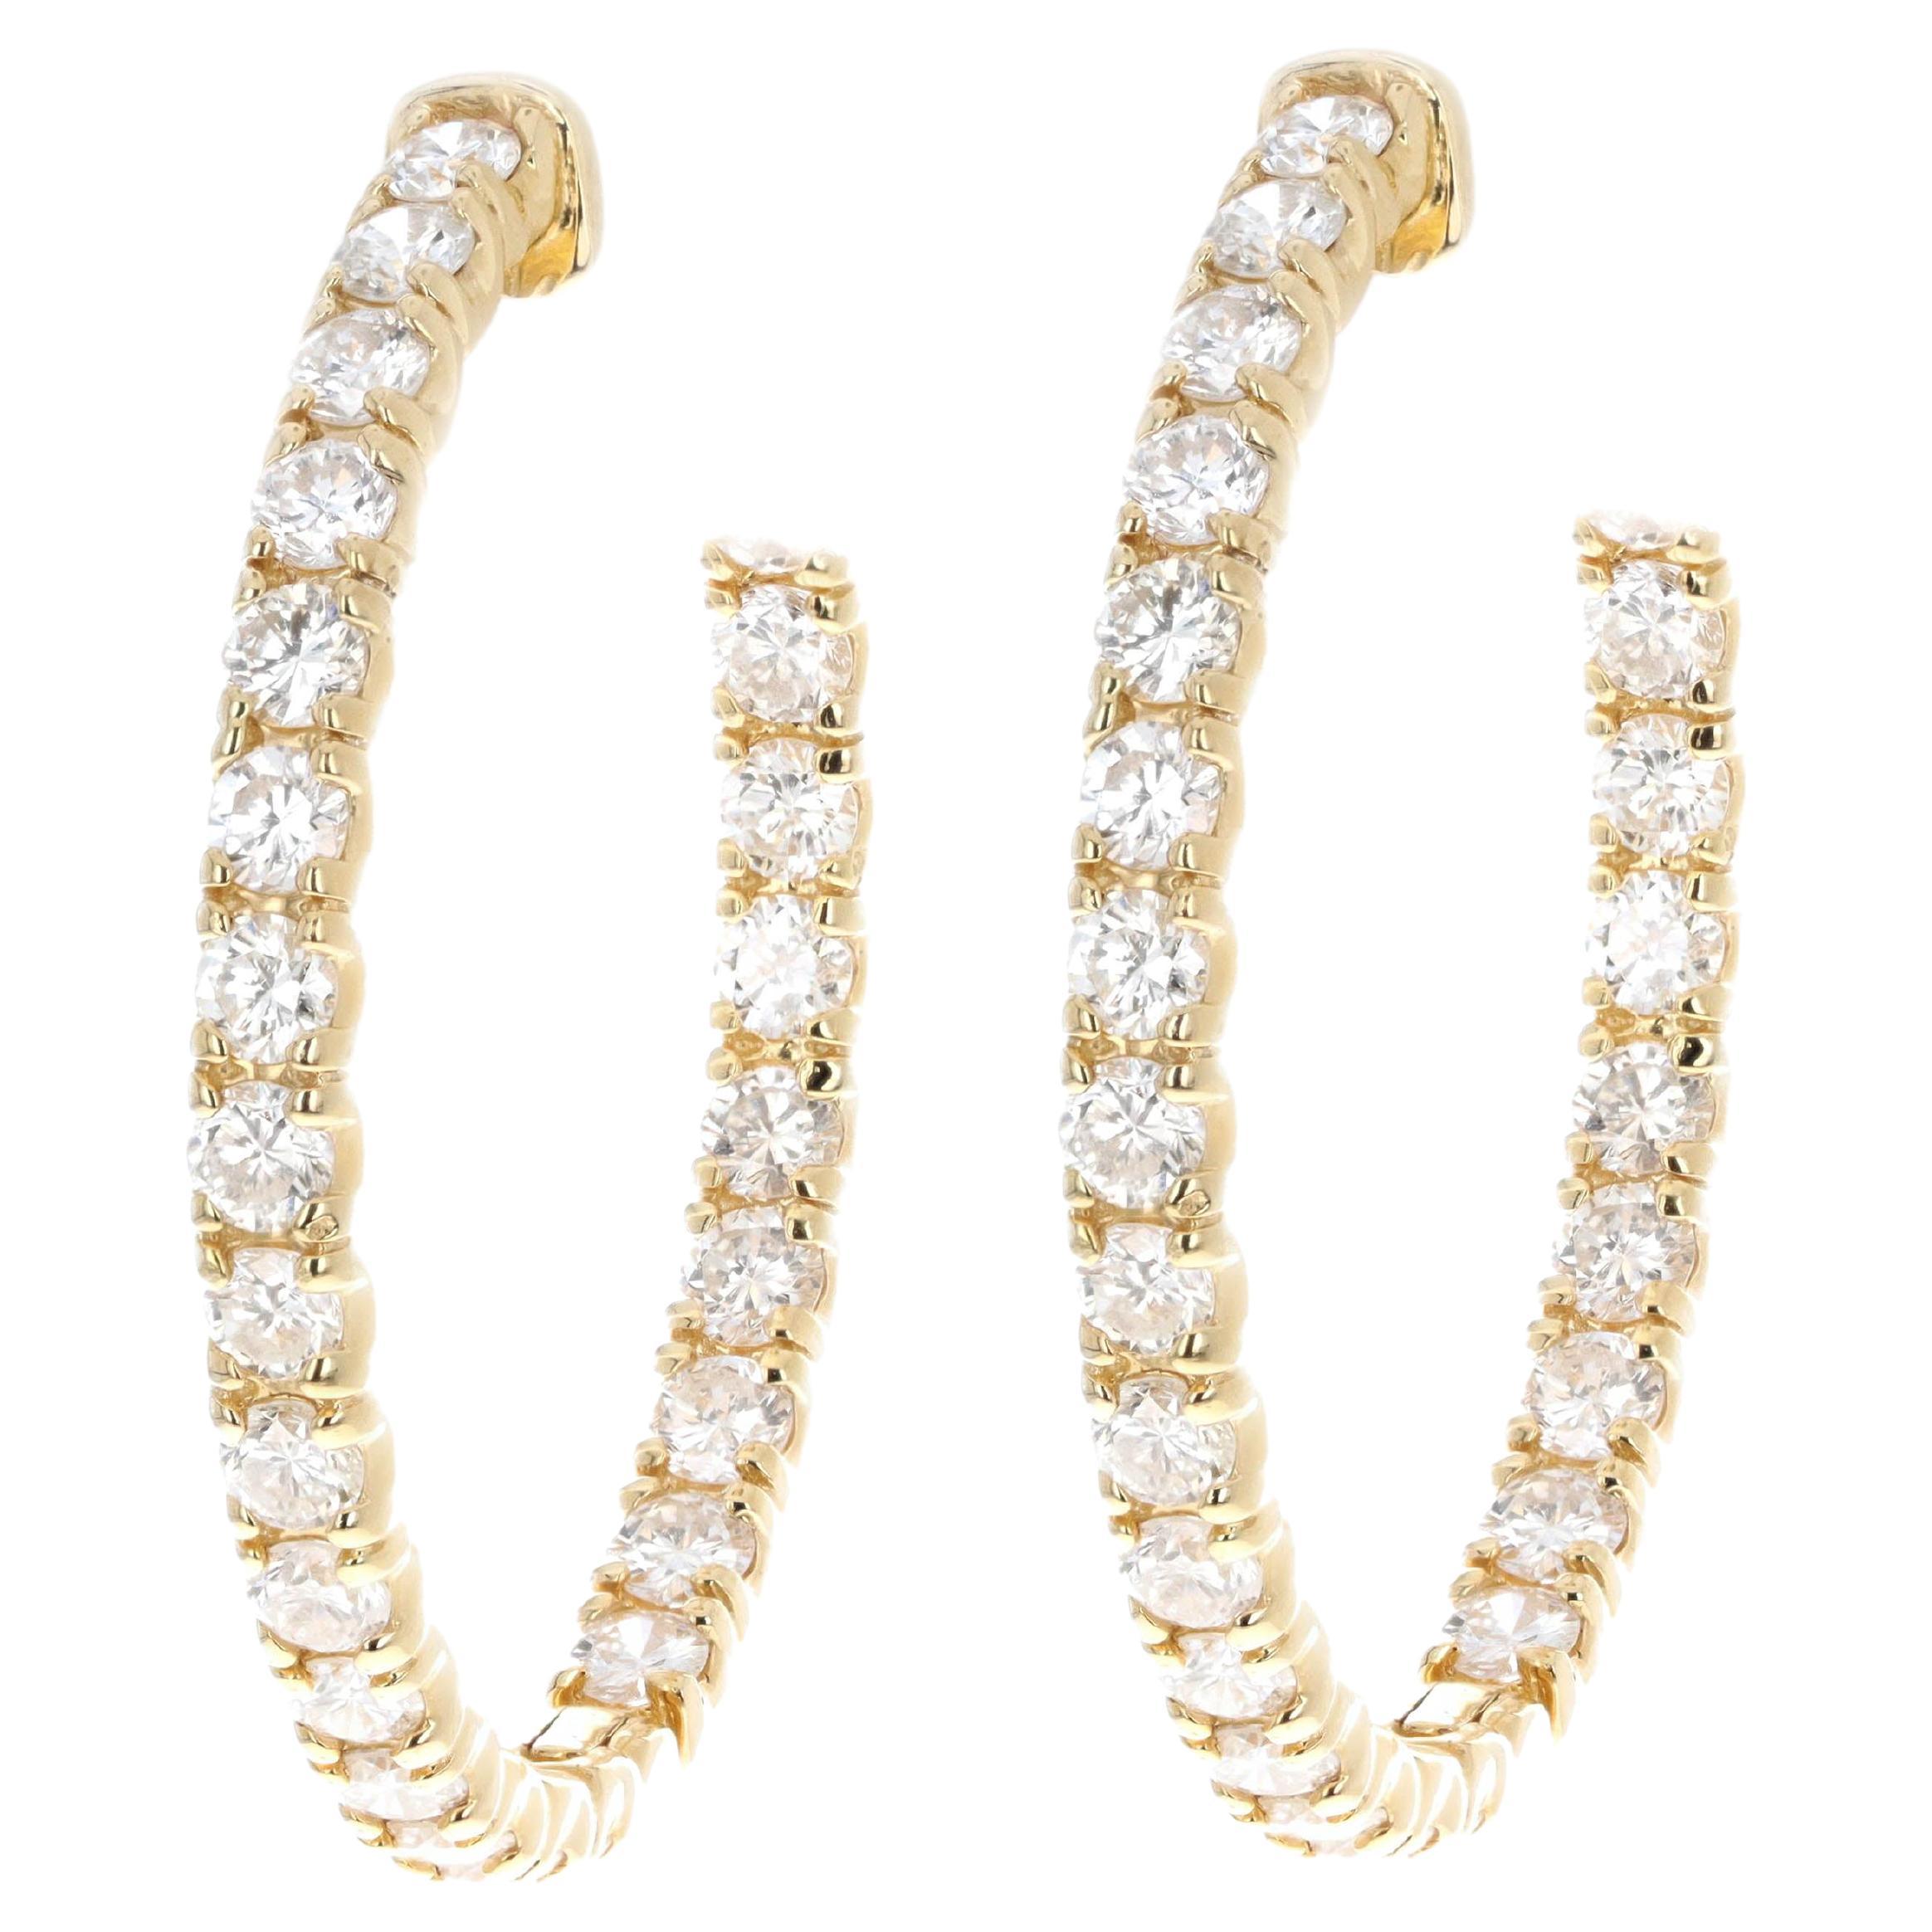 14K Gold 4.61 Carat Total Weight Round Brilliant Cut Diamond Inside-Out Hoops